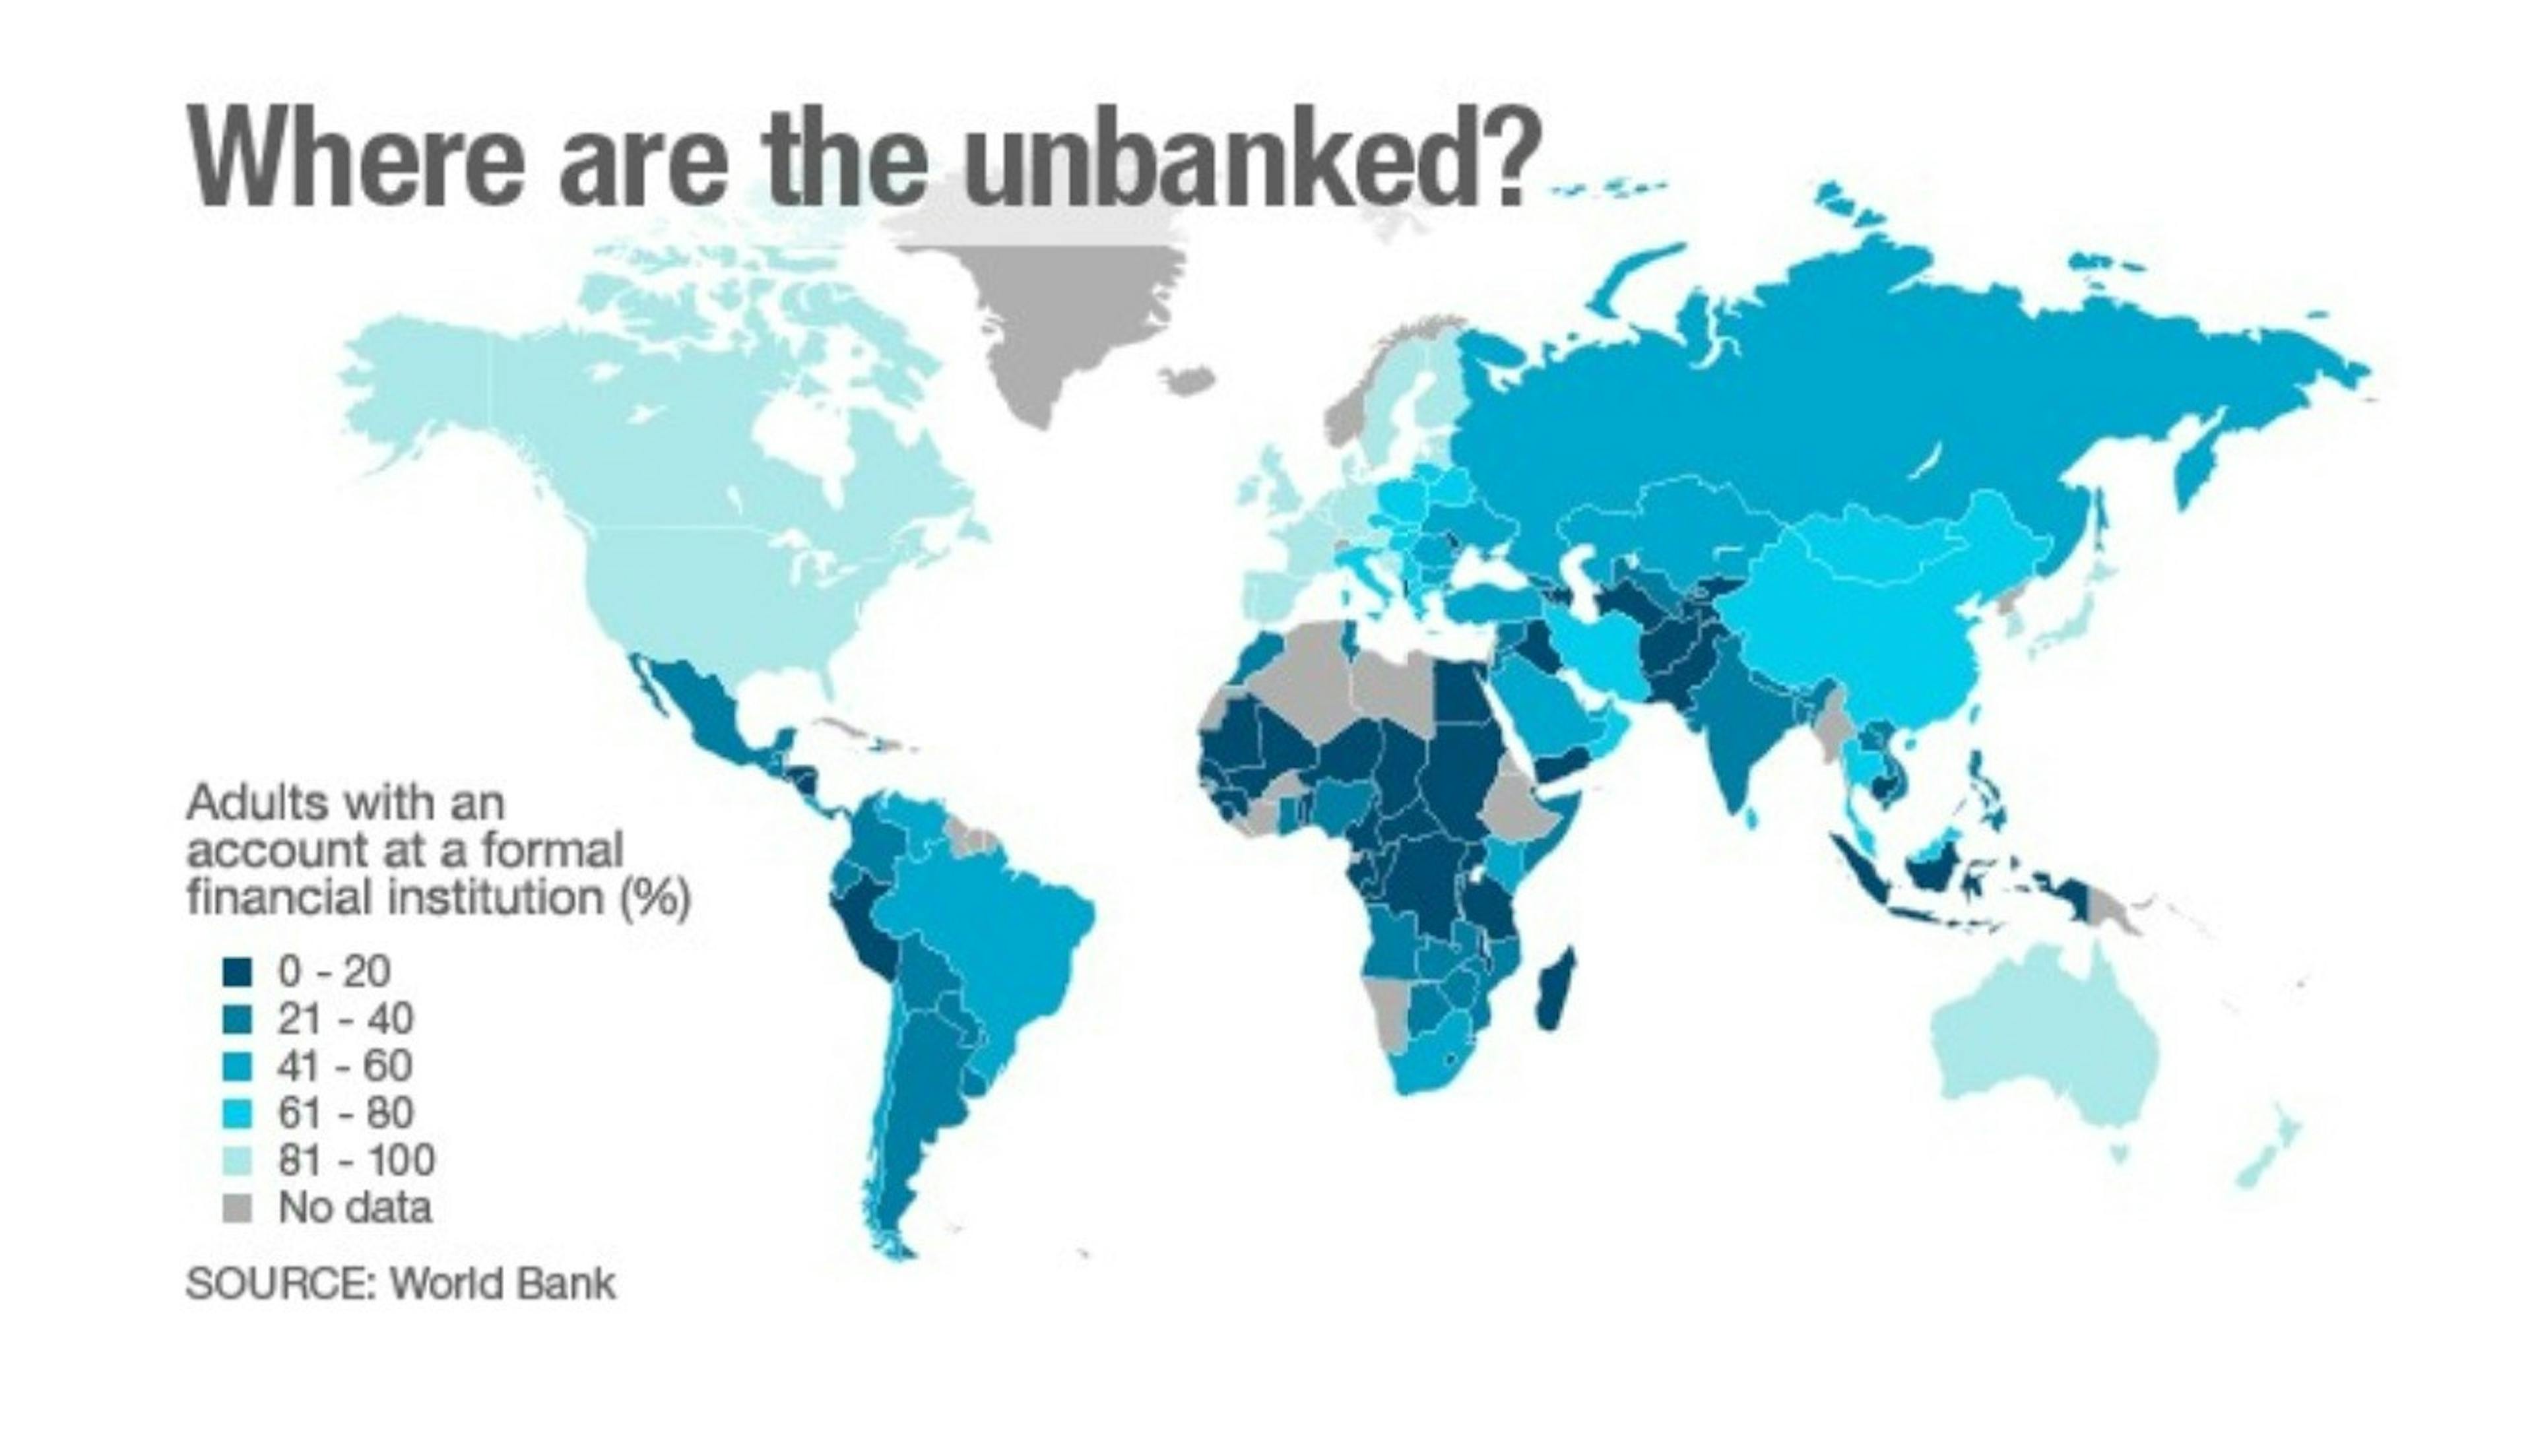 SRC: https://www.worldbank.org/en/news/infographic/2012/04/19/who-are-the-unbanked